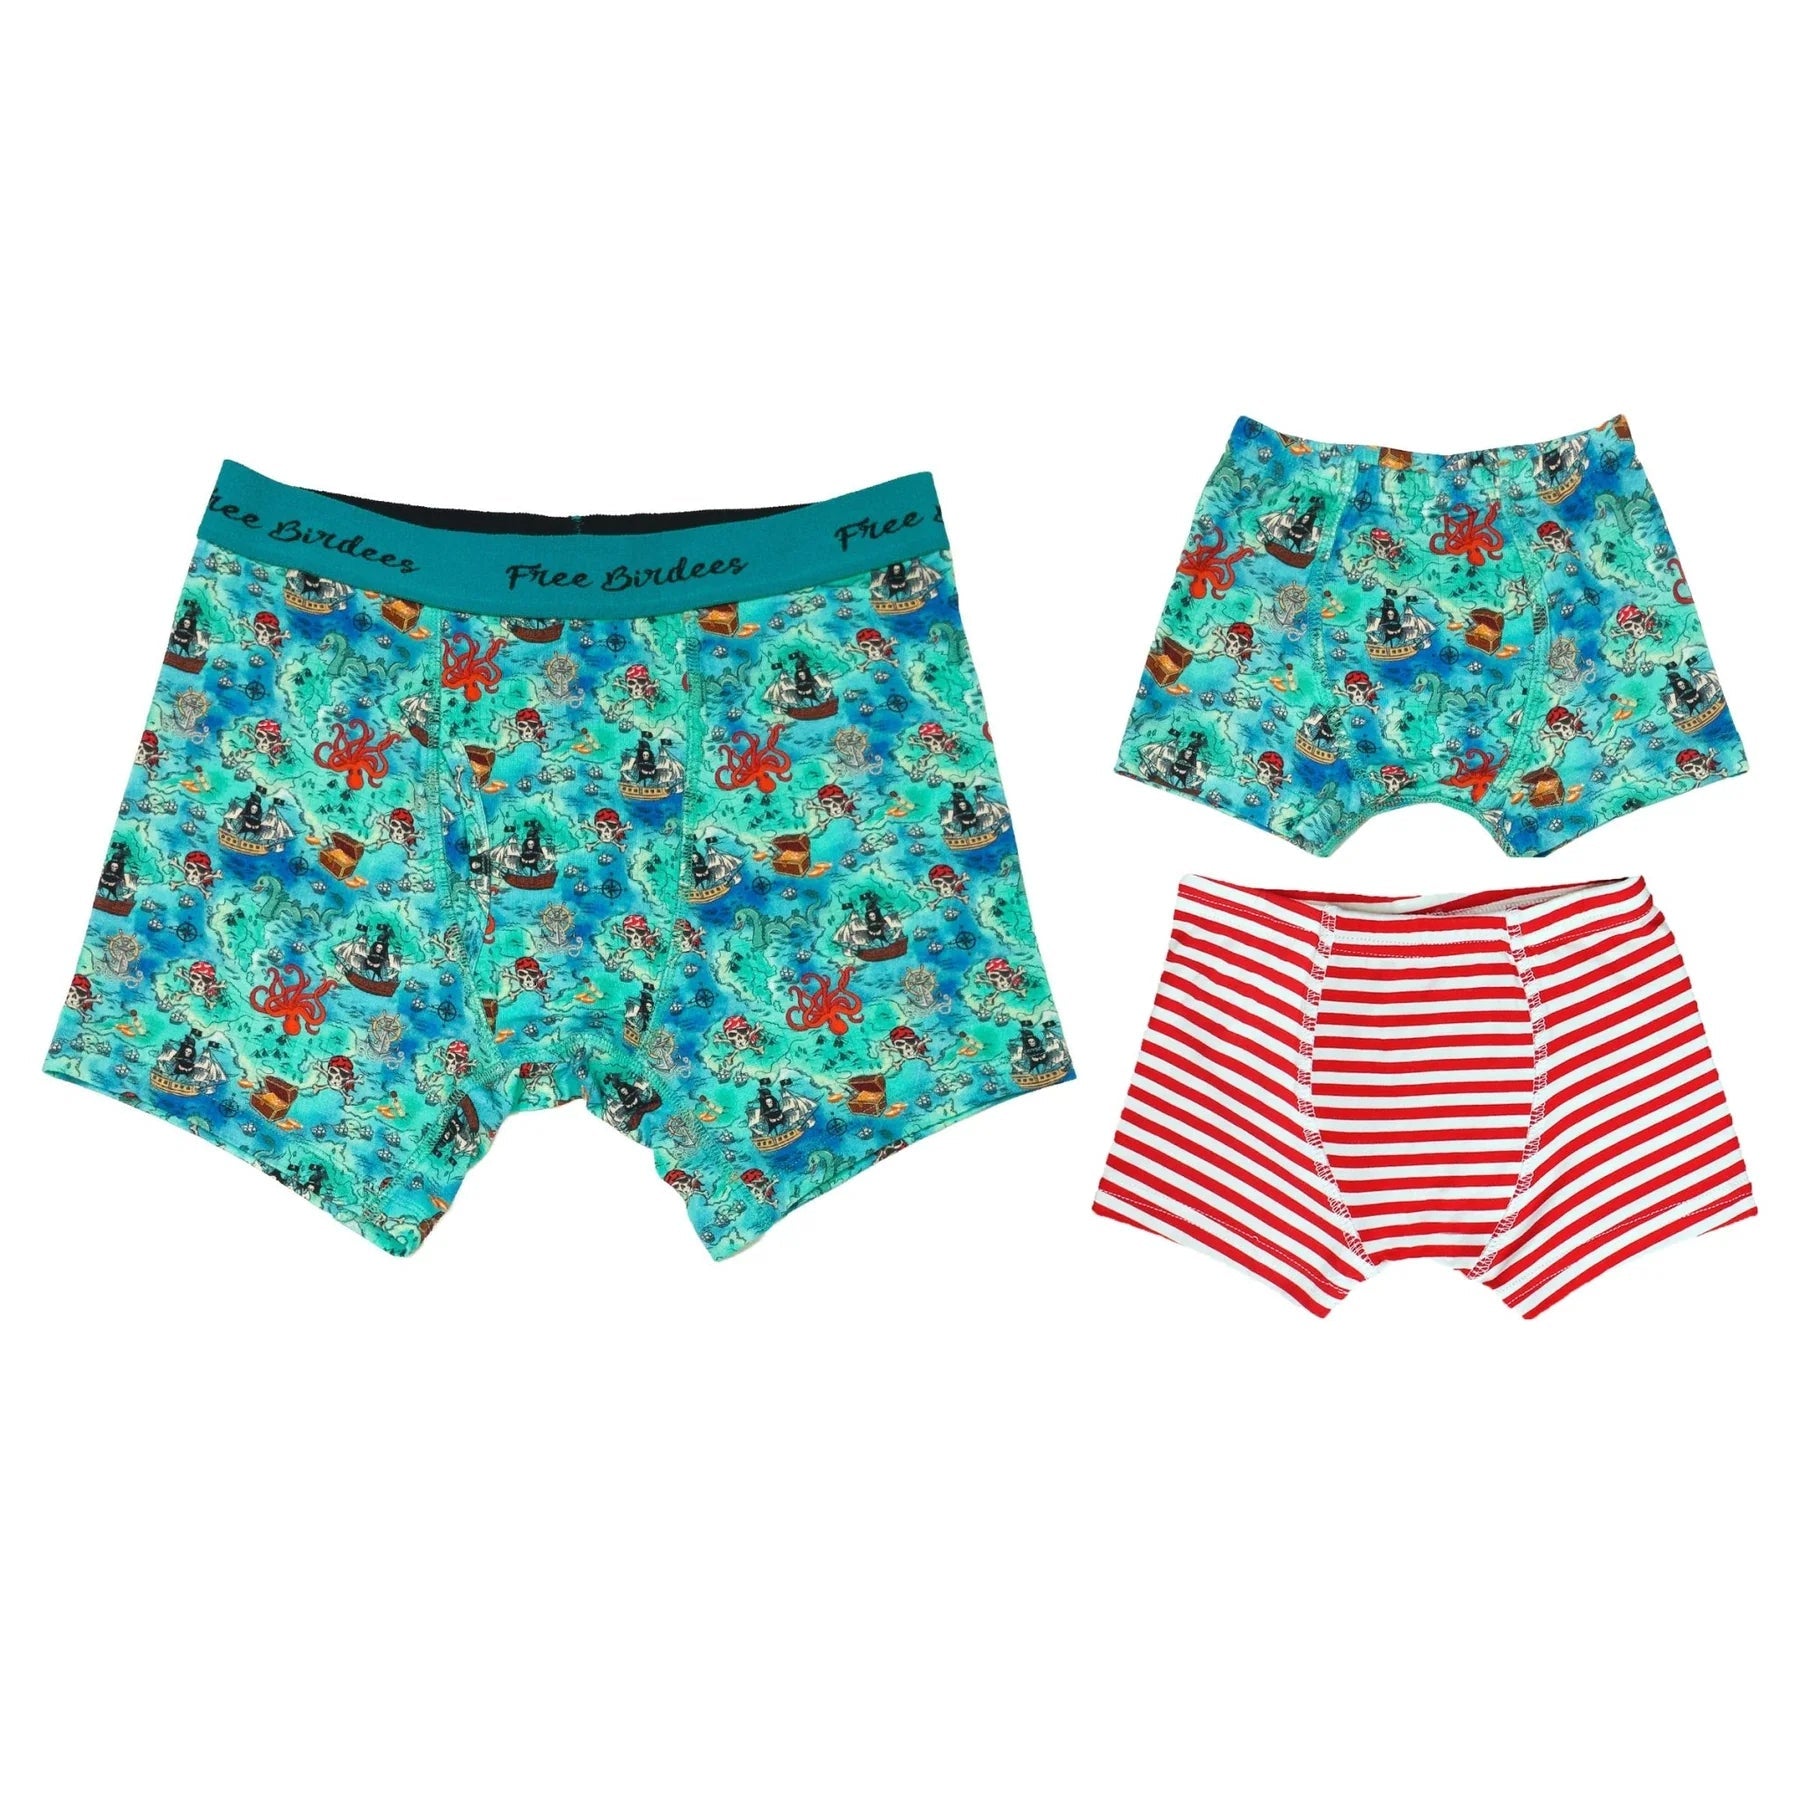 Transitioning From Diapers to Underwear – Free Birdees